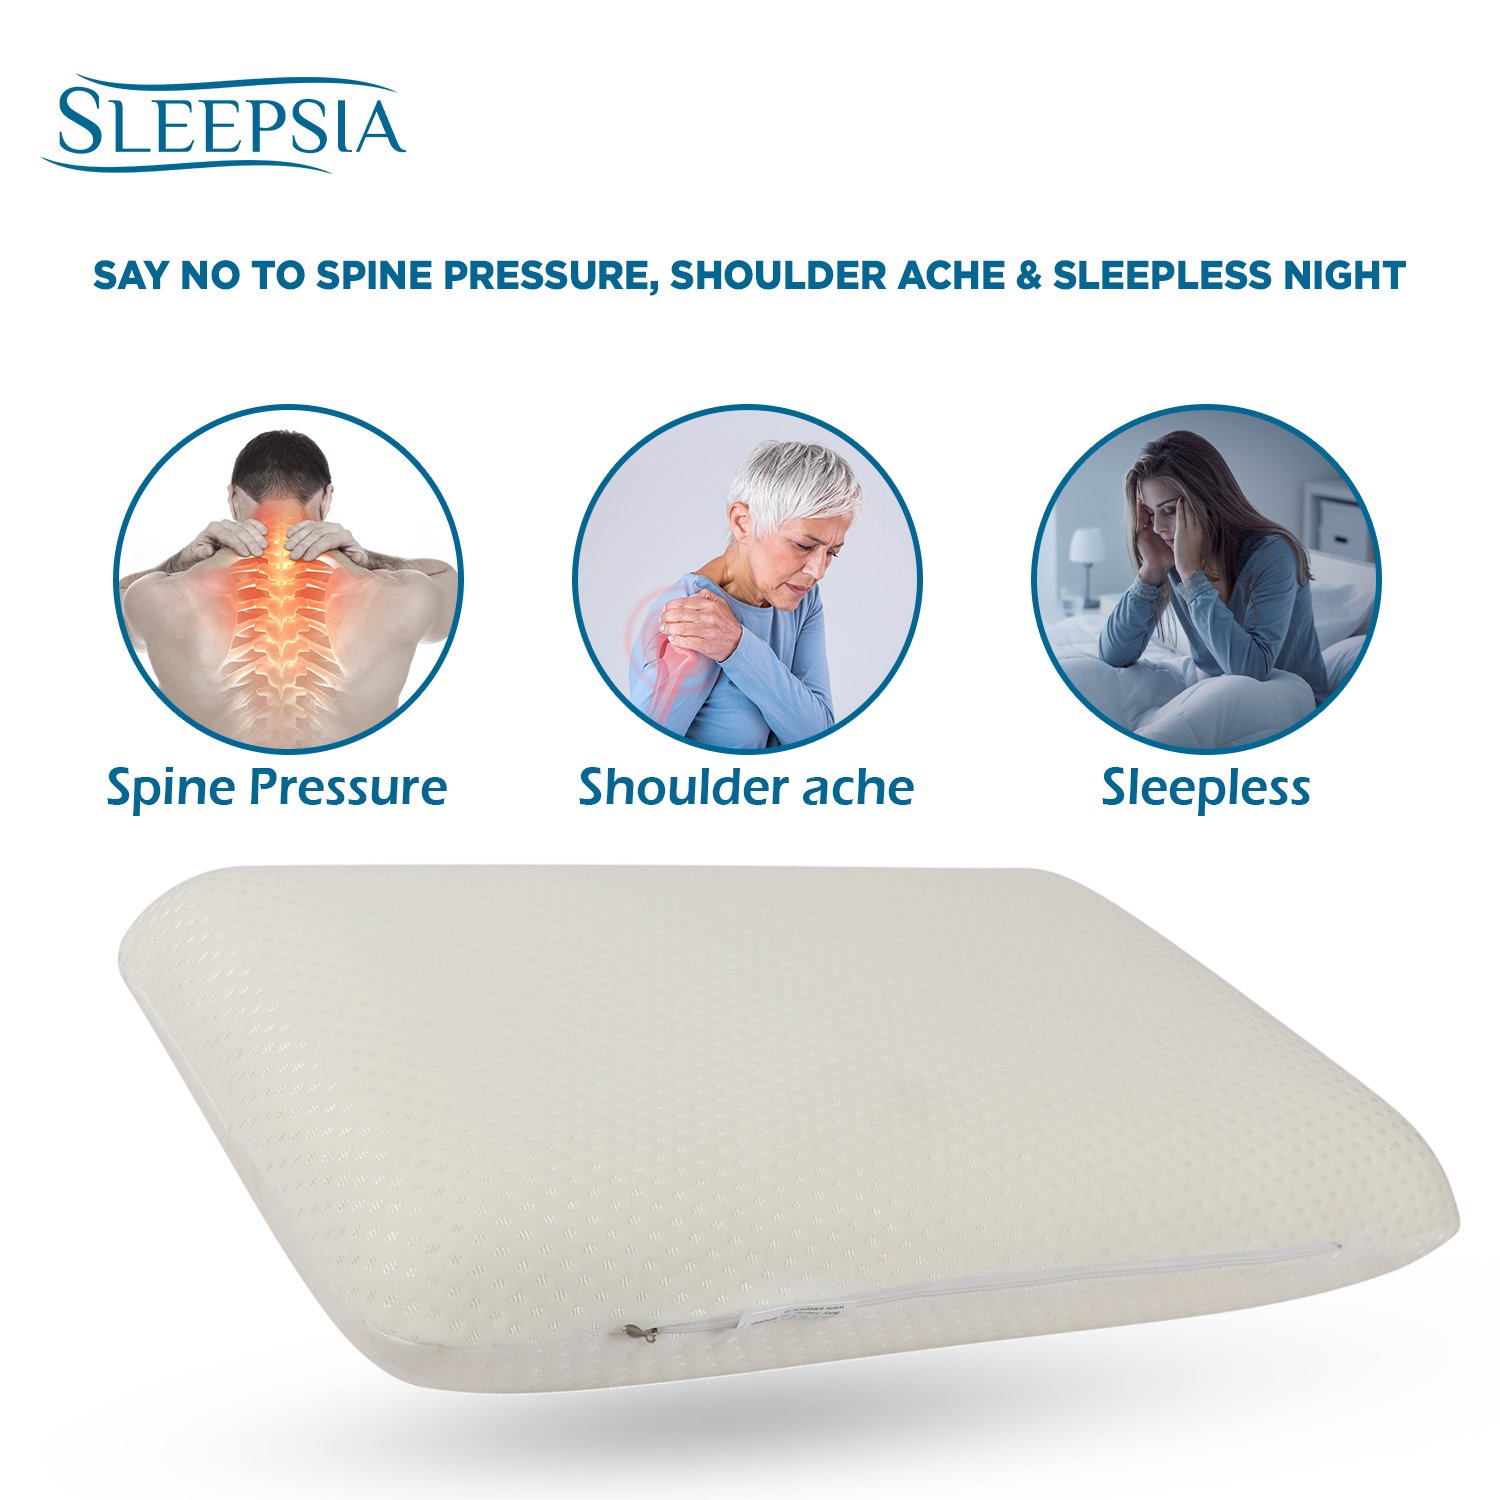 What is the Best Neck Pillow for Side Sleepers?